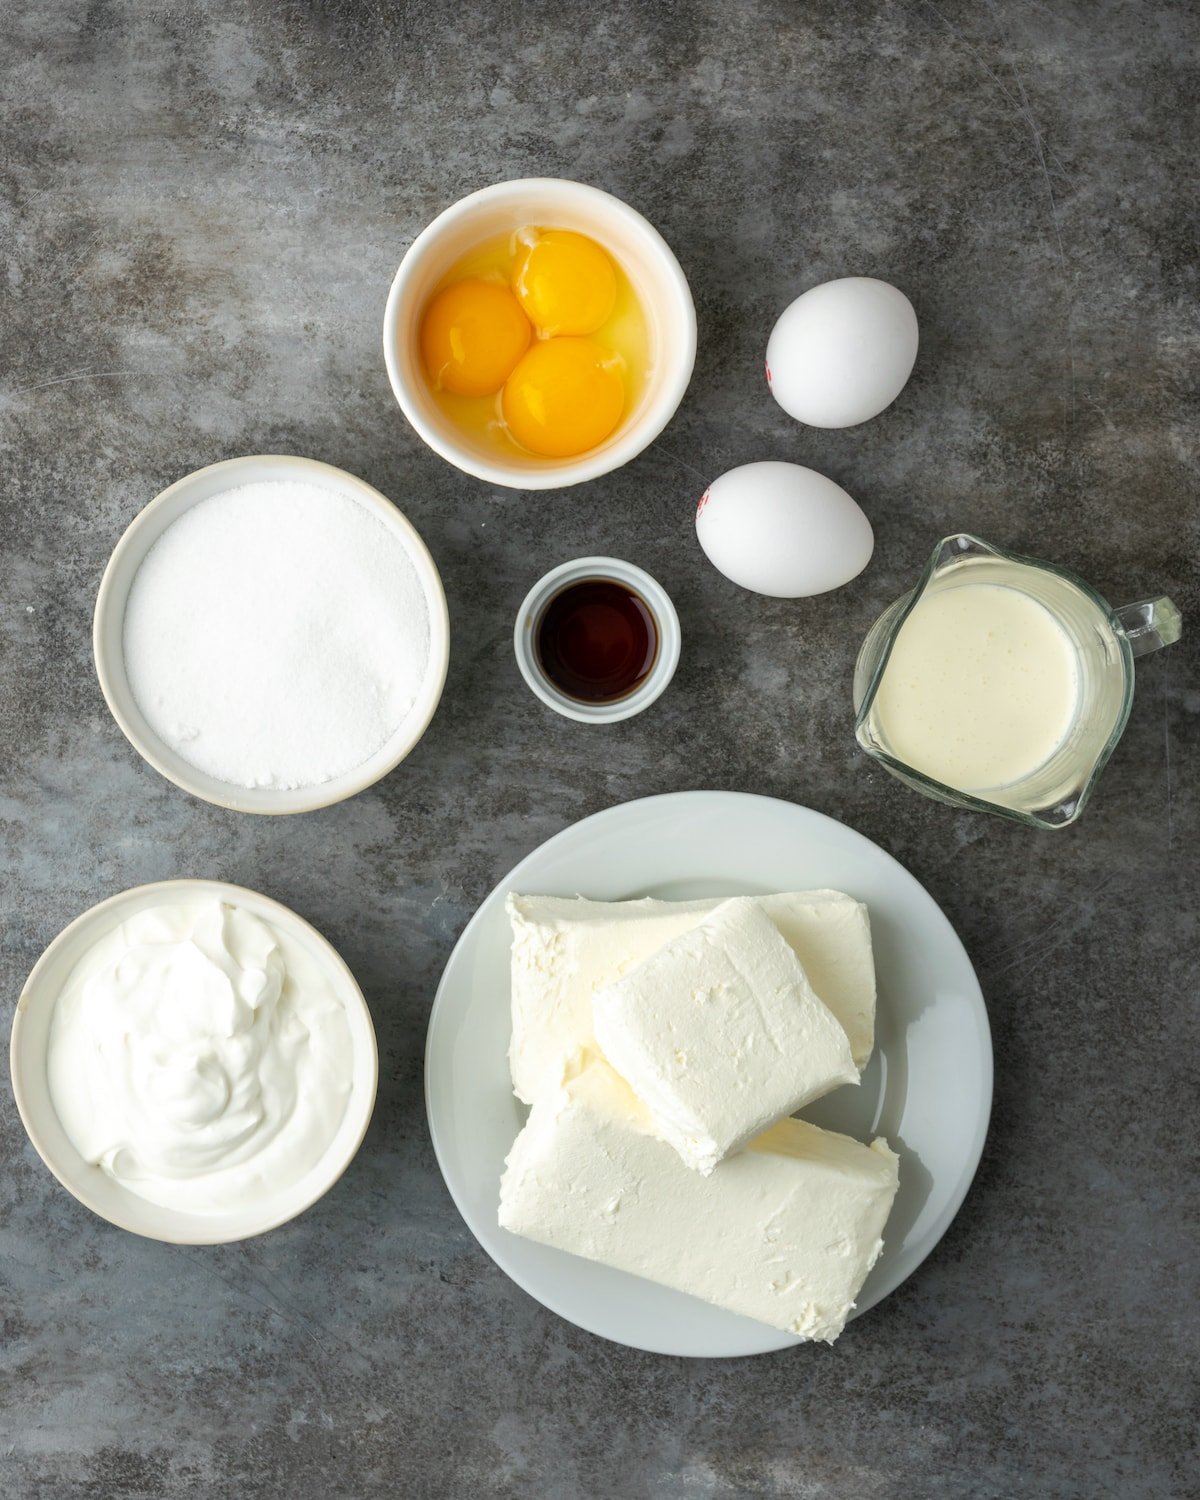 The ingredients for the sour cream cheesecake filling.